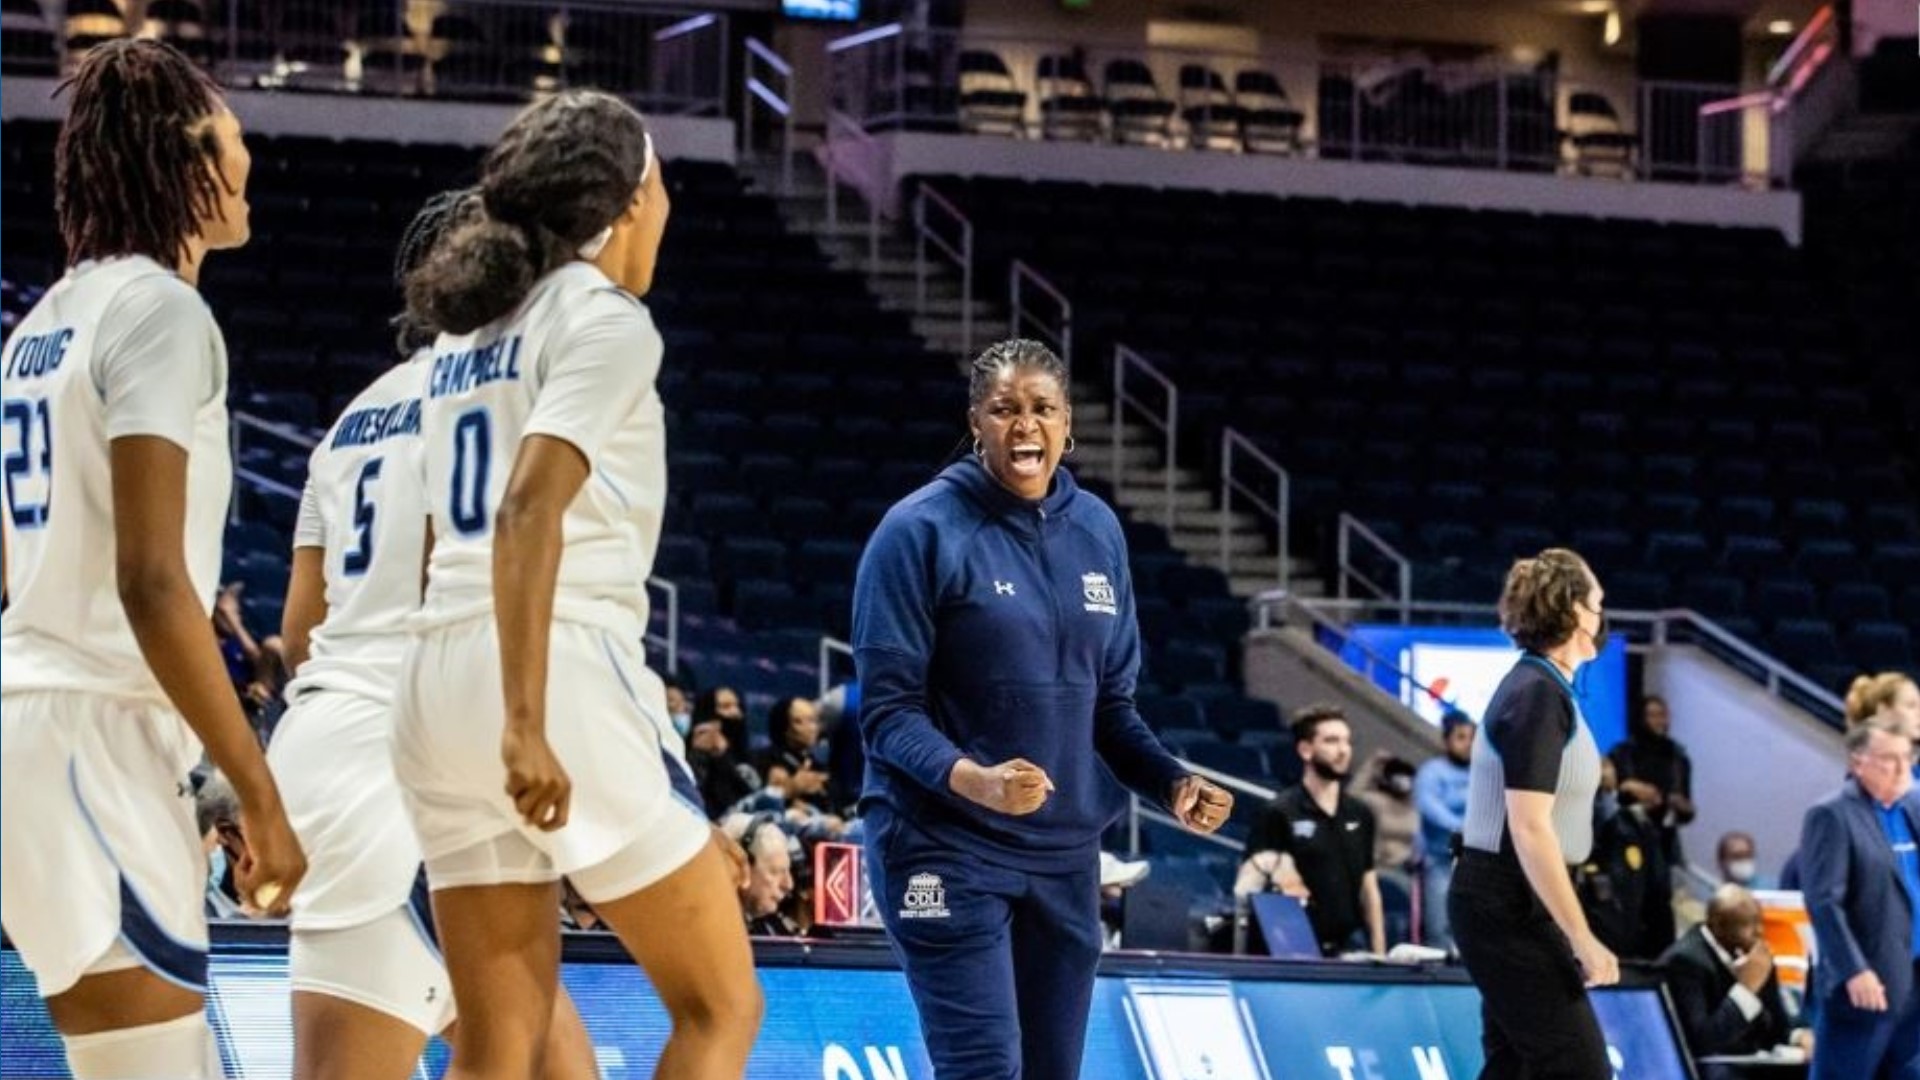 Milton-Jones record at Old Dominion is 59-33 as she enters her 4th season at the school.